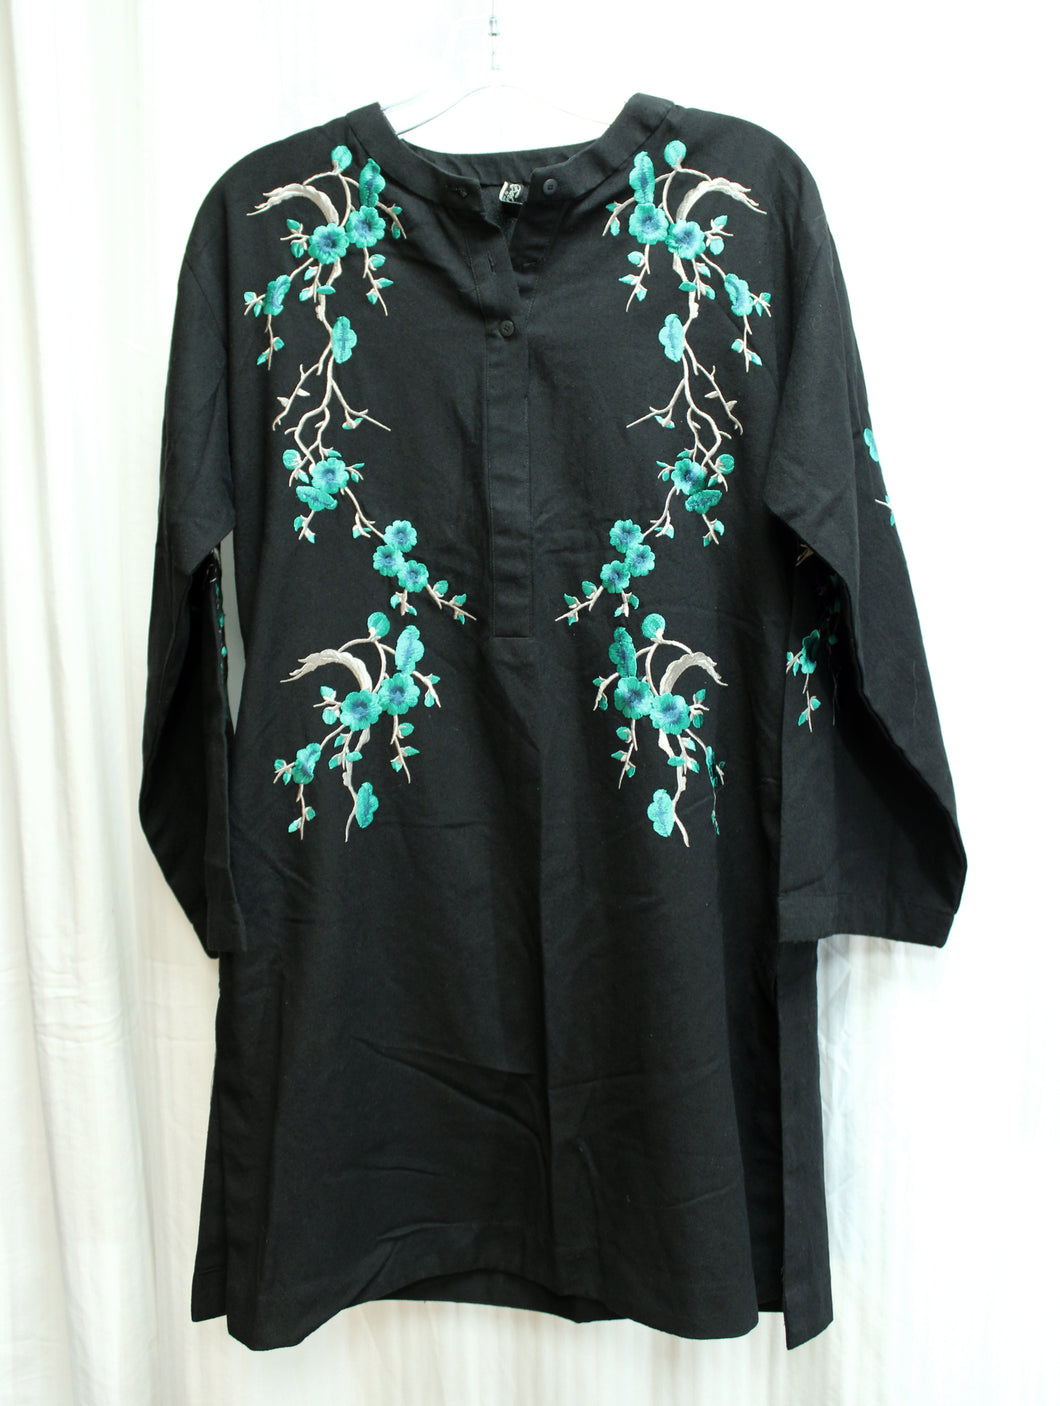 Ethnic by Outfitters - Black w/ Green & Blue Embroidered Tunic Shirt - Size XS